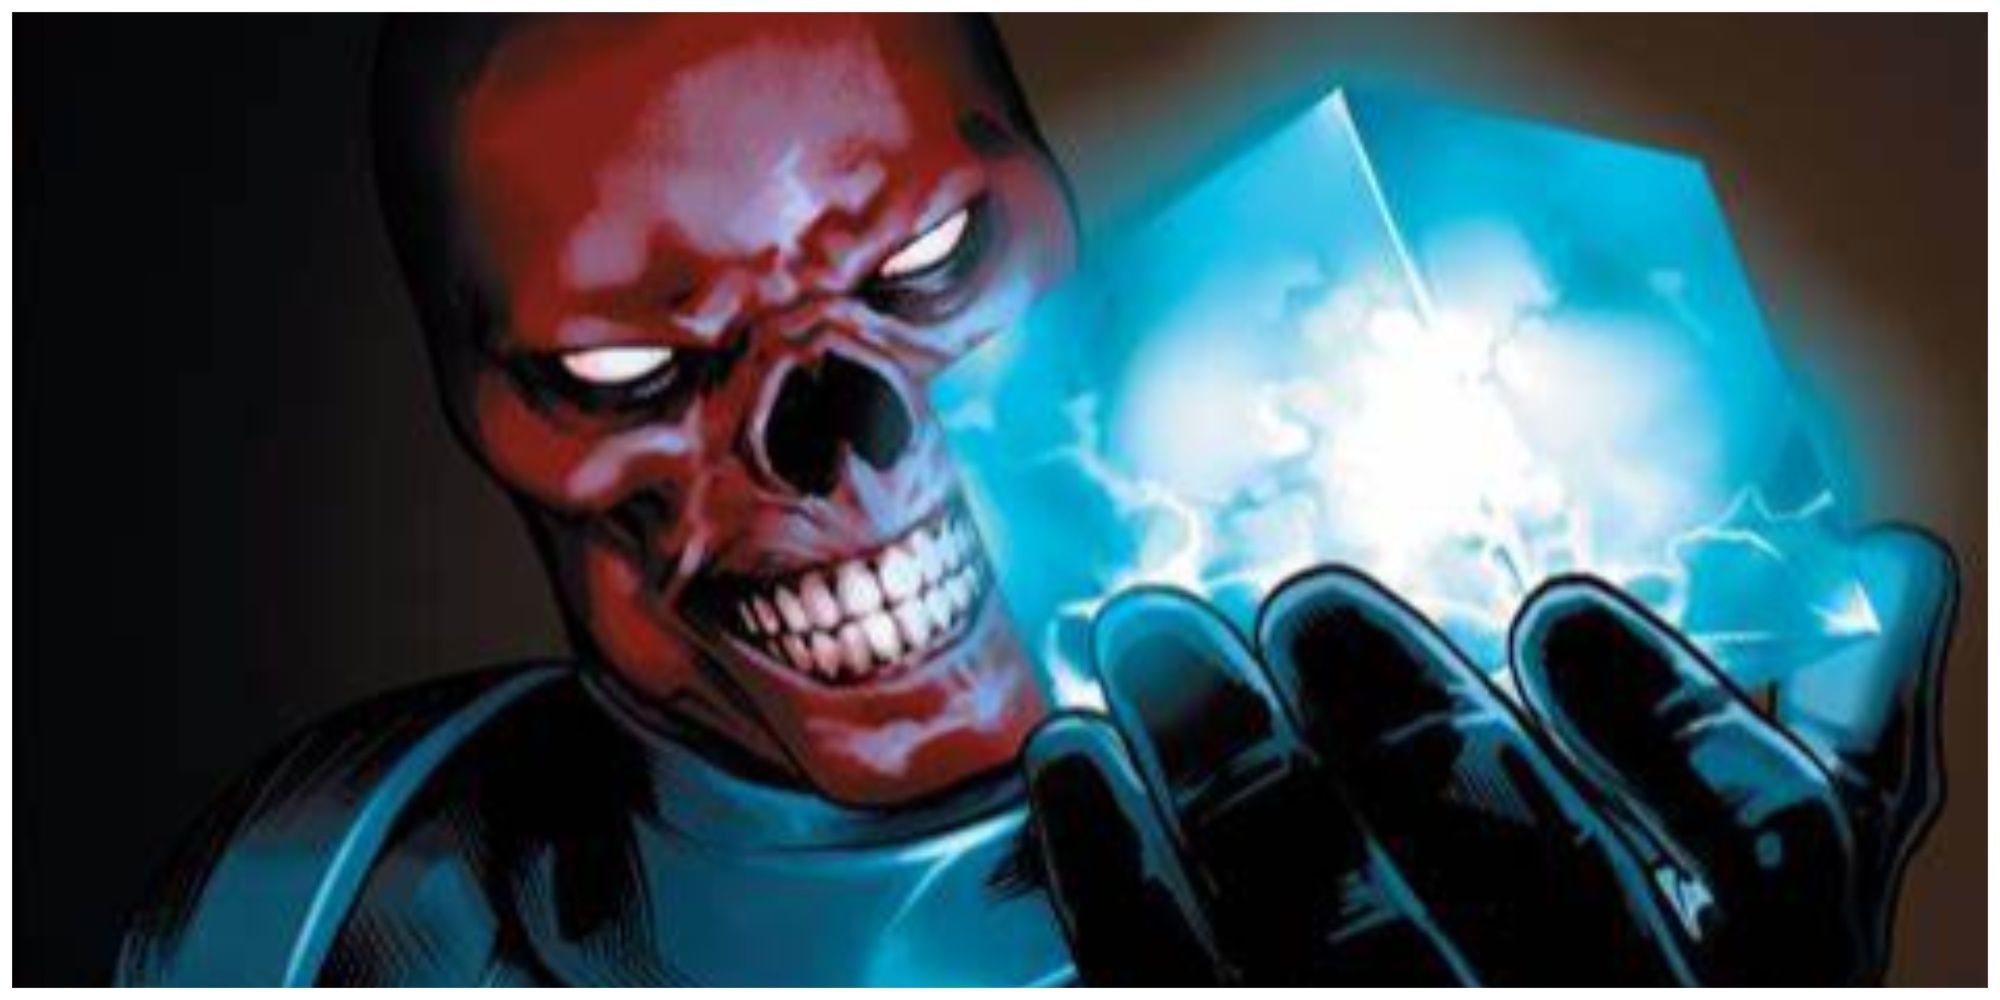 Red Skull holding a glowing blue cube in Marvel Comics